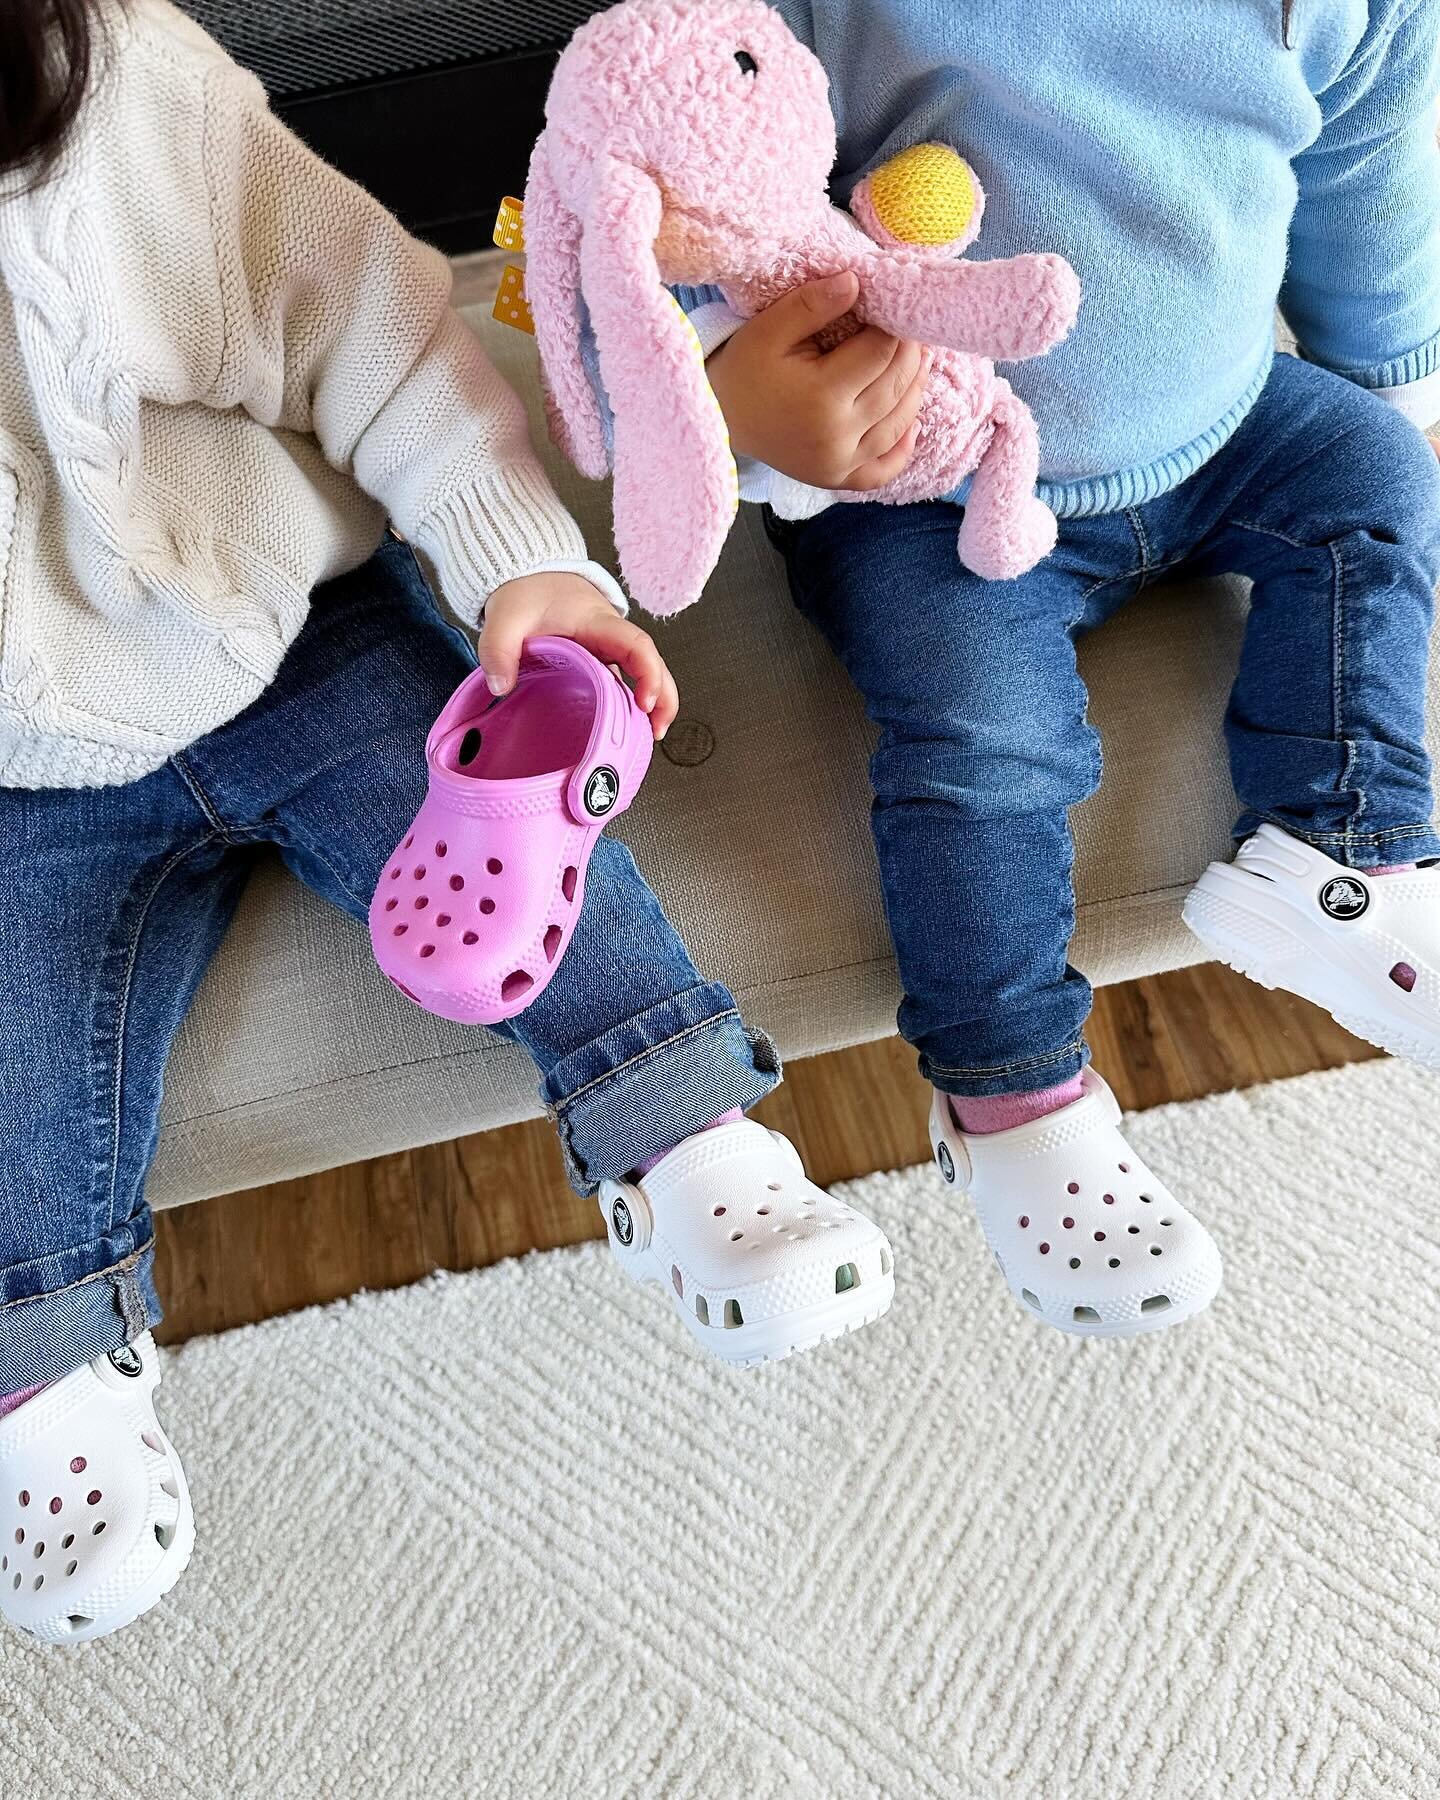 Kicking myself not getting a matching pair of @crocs 🩷🤍🩷🤍 GH&rsquo;s first Crocs!